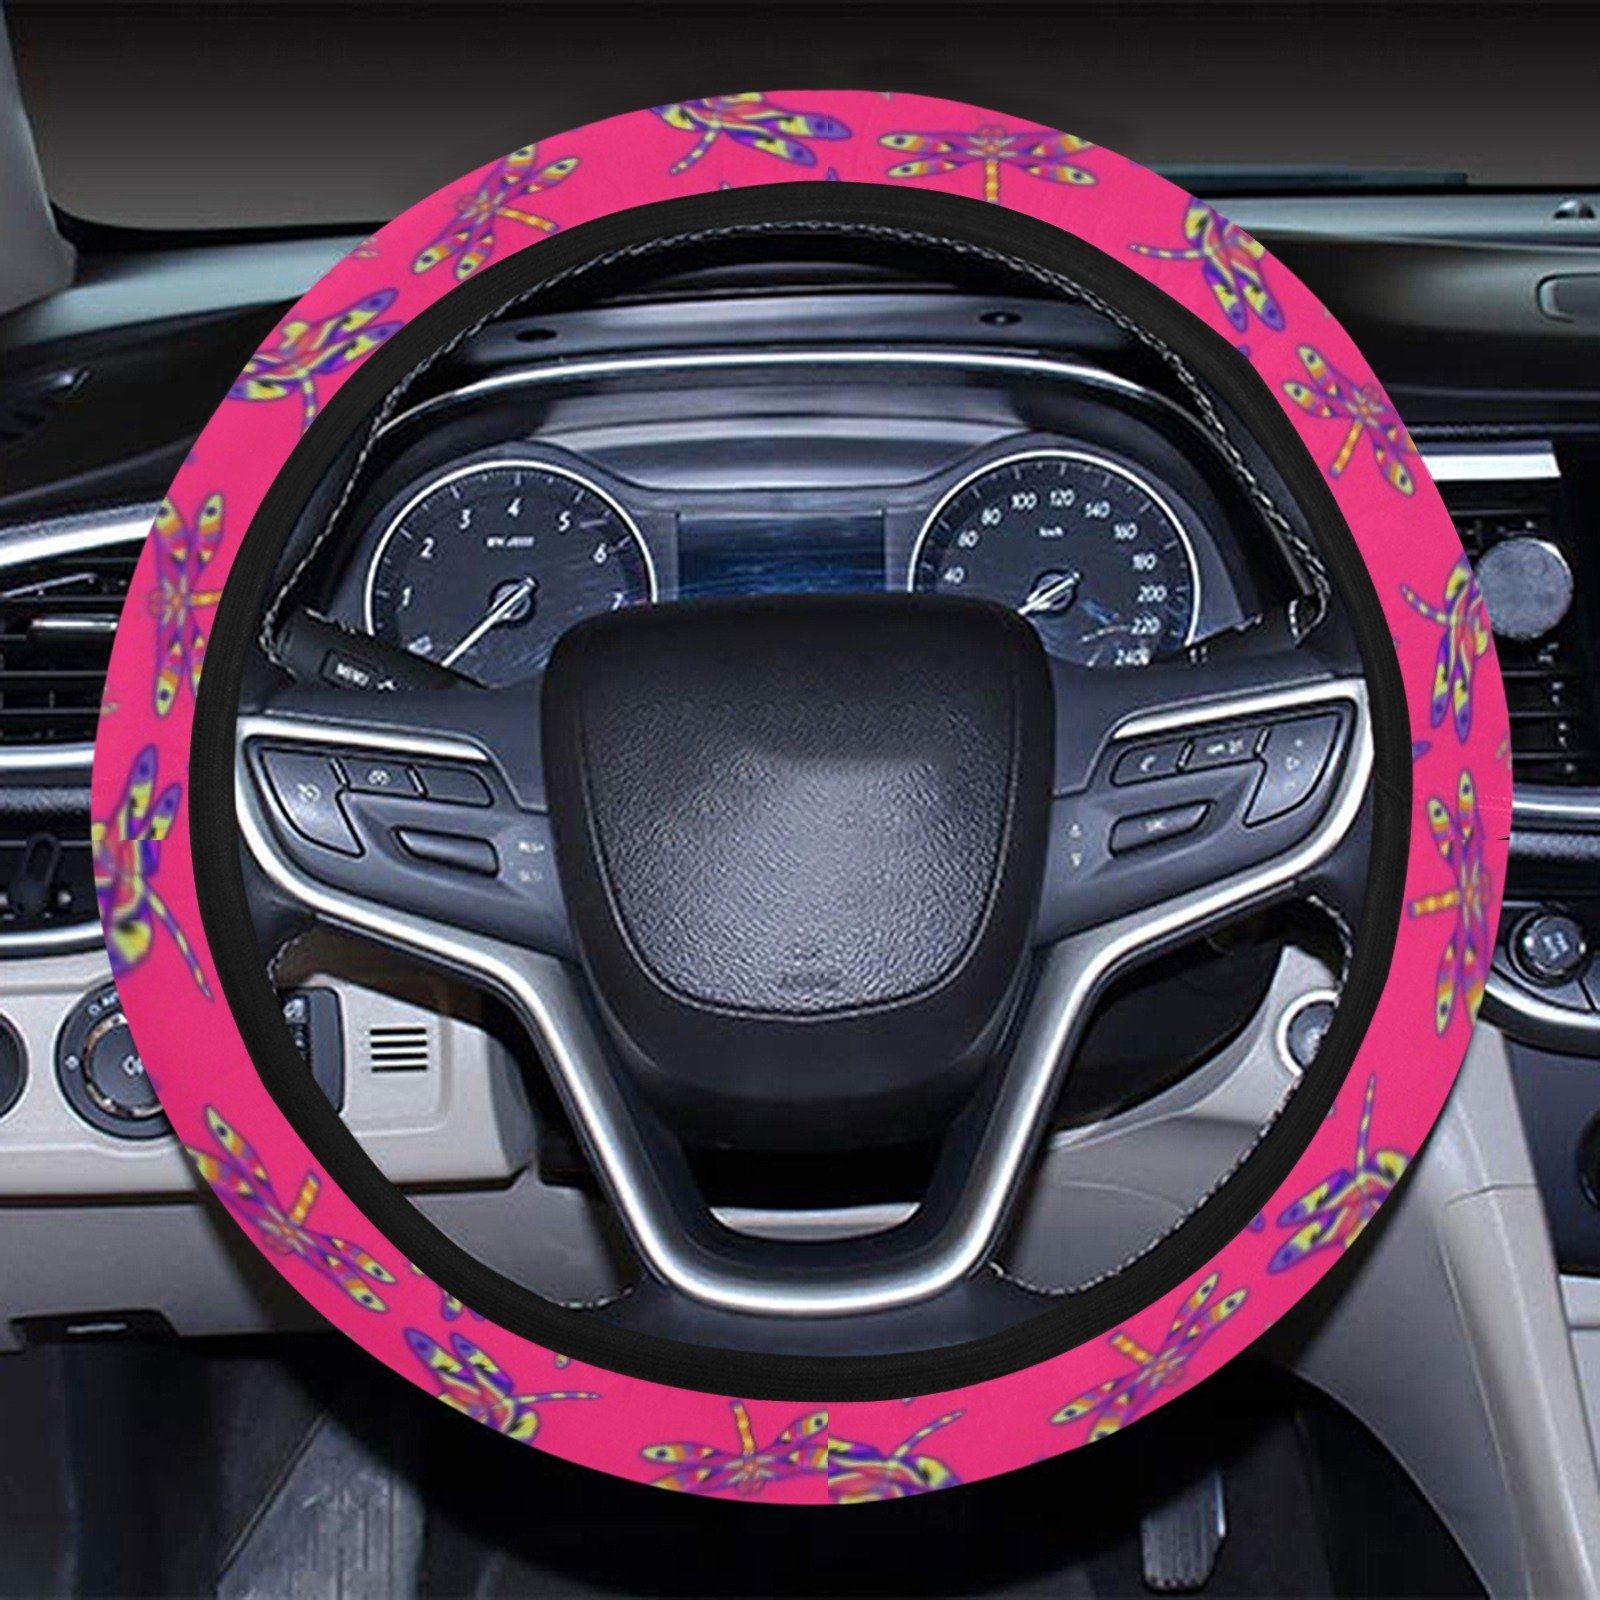 The Gathering Steering Wheel Cover with Elastic Edge Steering Wheel Cover with Elastic Edge e-joyer 